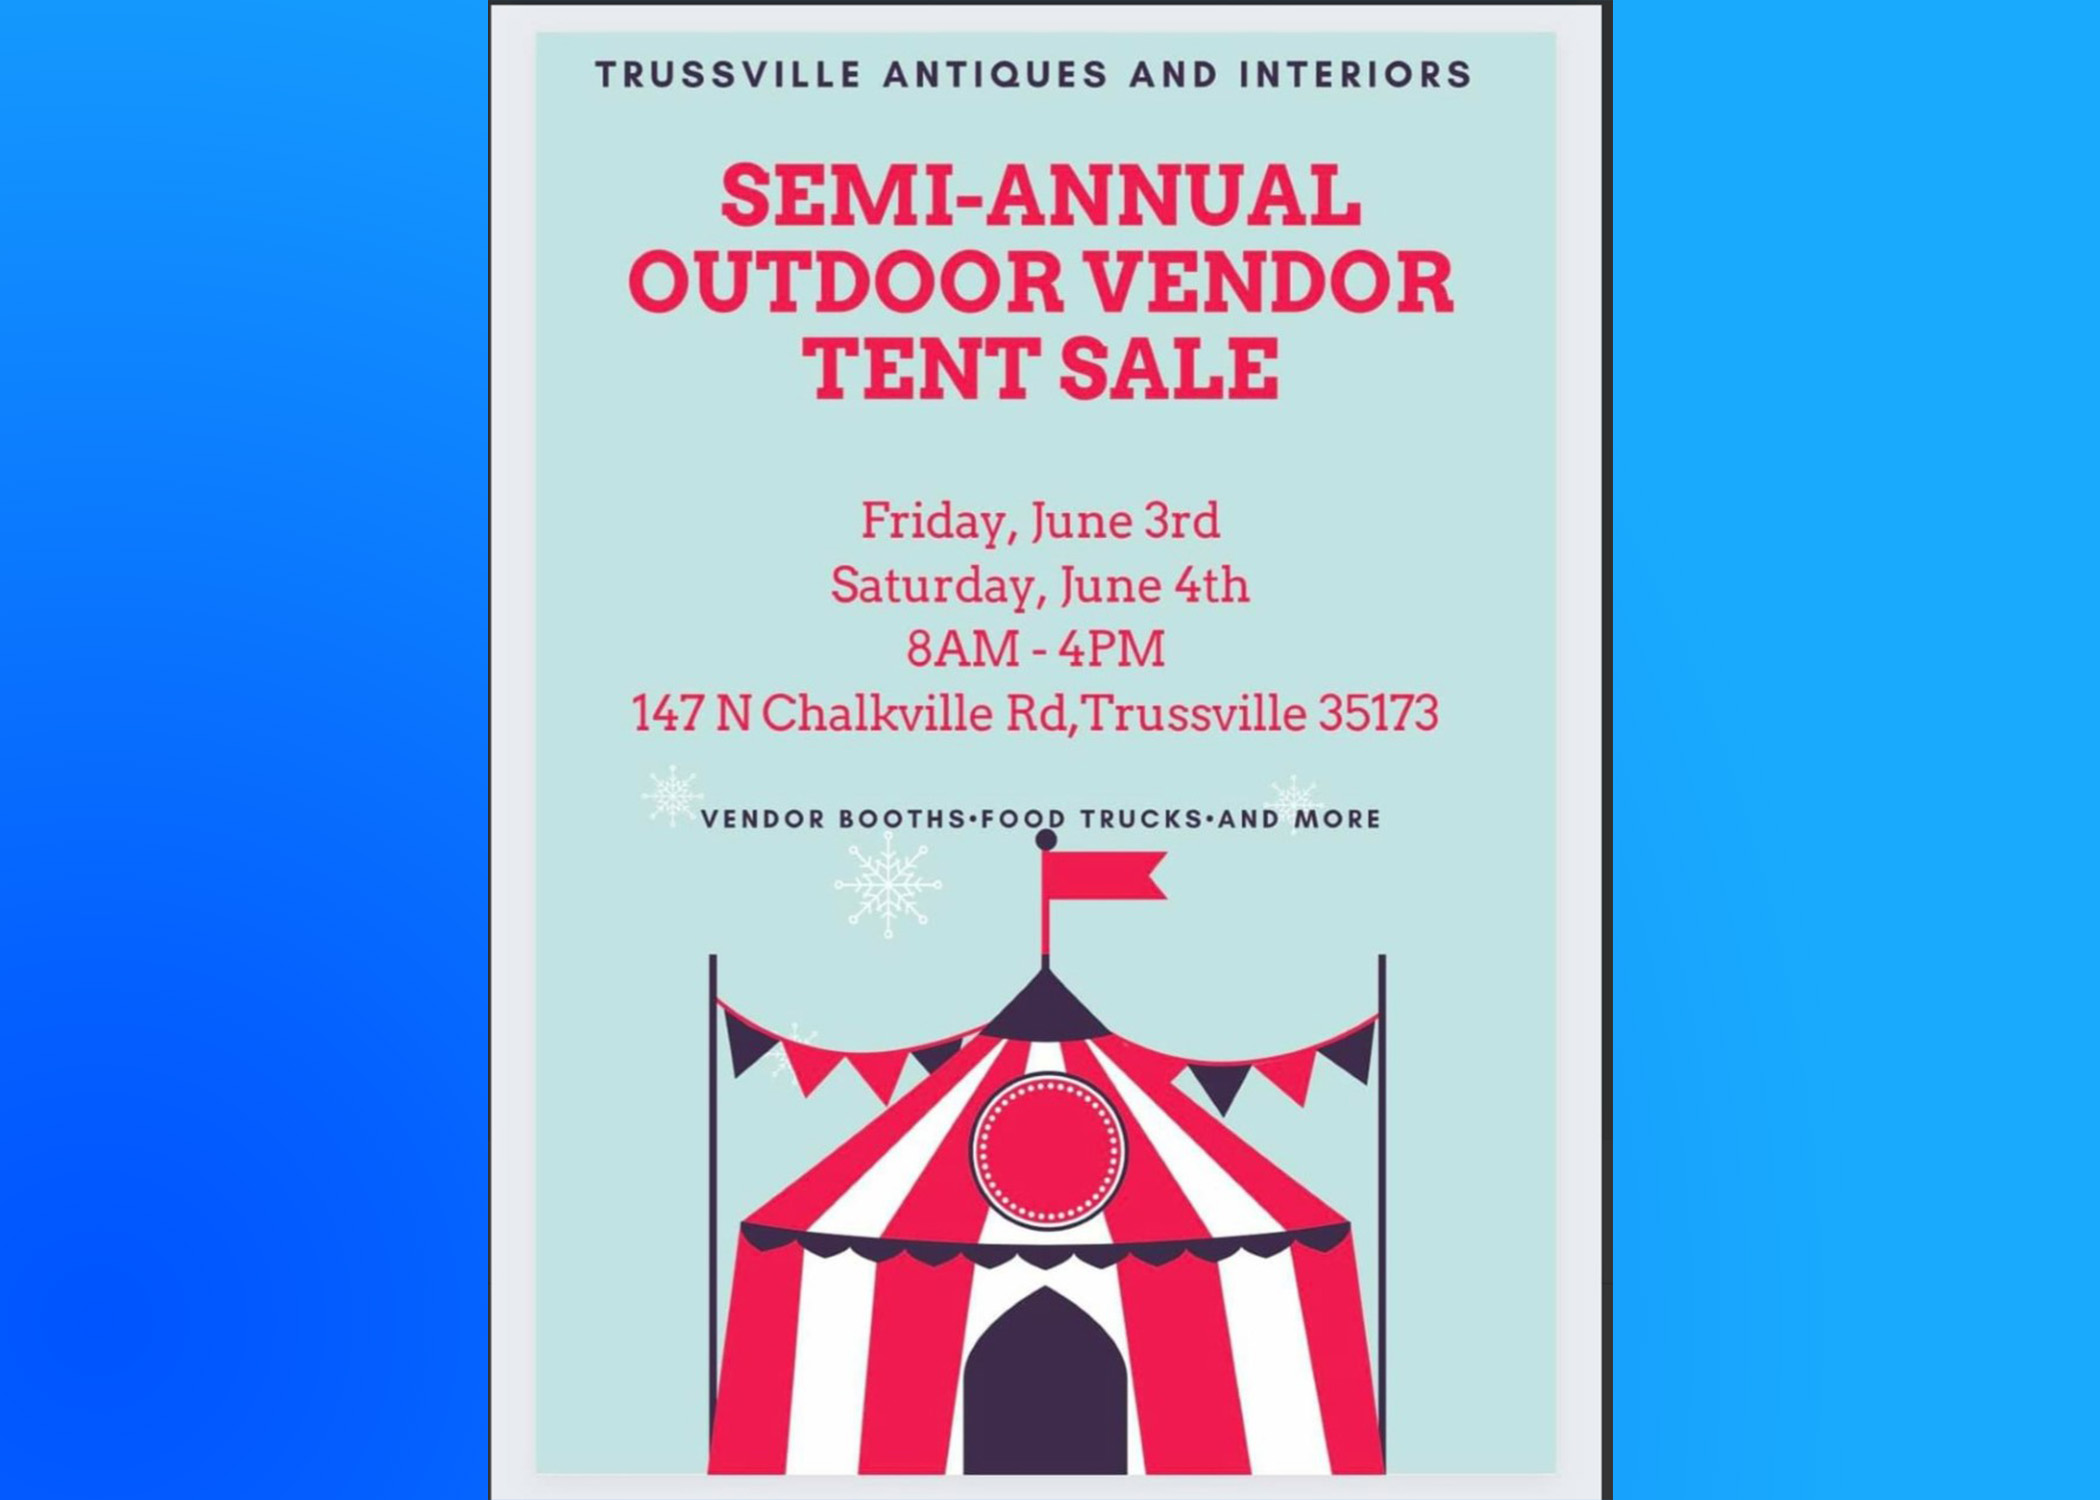 Trussville Antiques and Interiors big outdoor Vintage Market